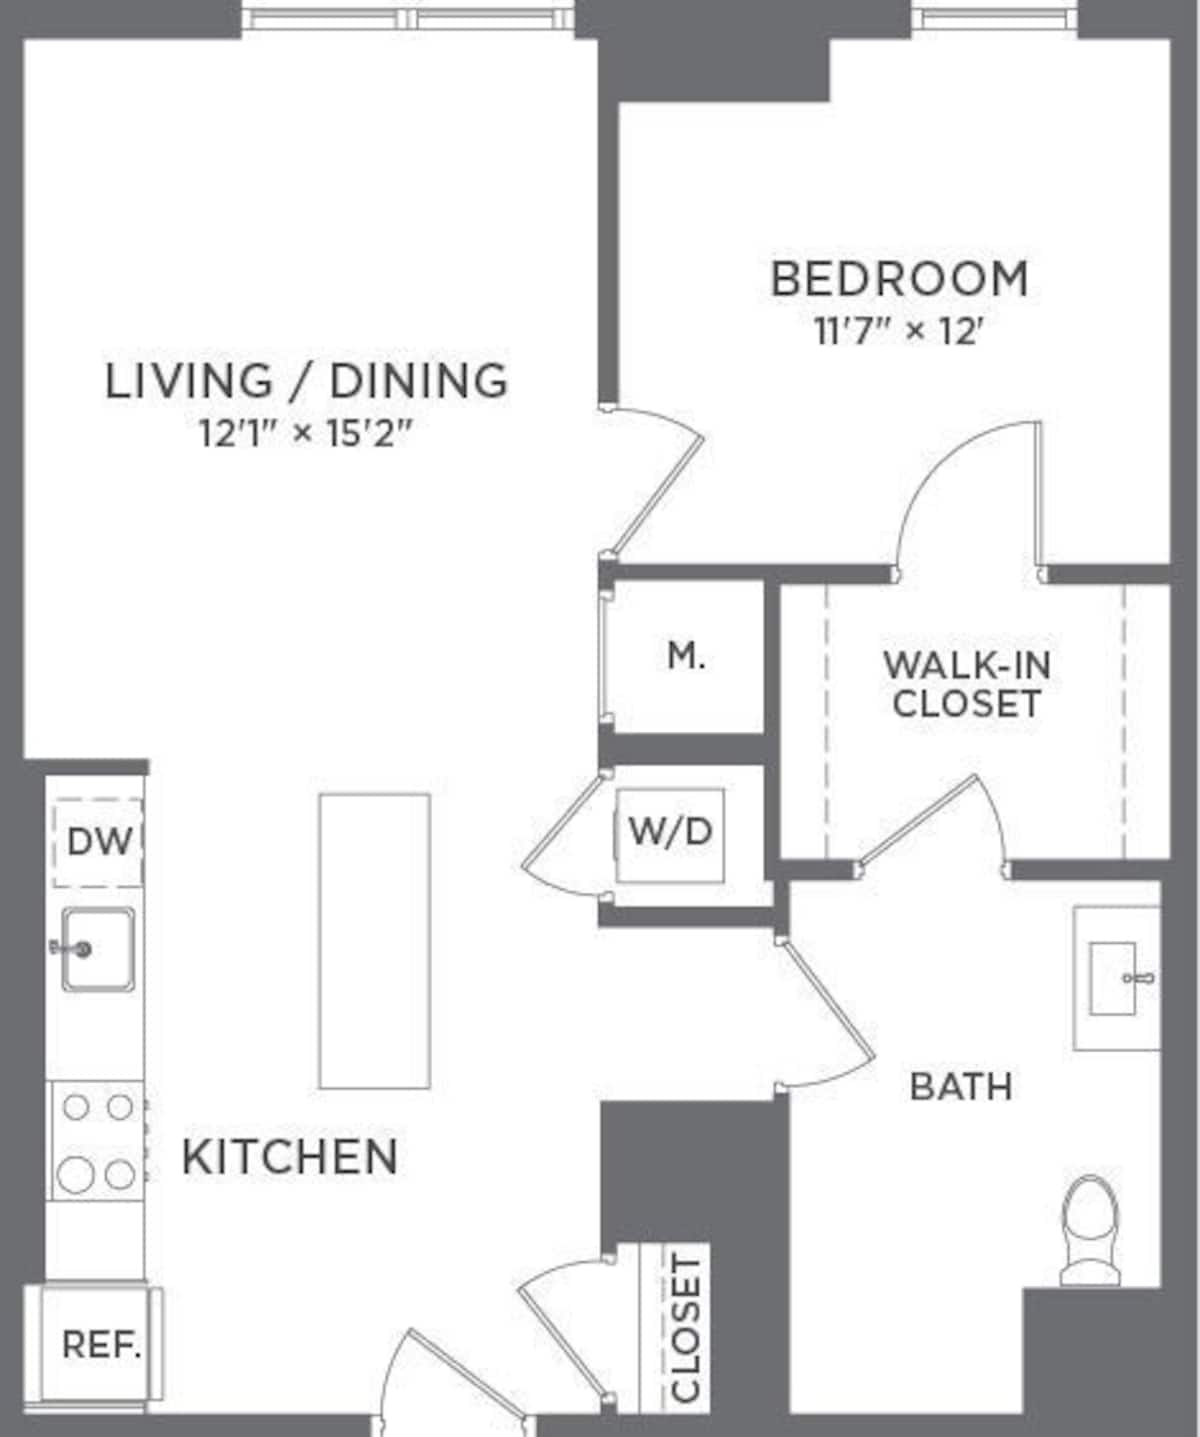 Floorplan diagram for A6A, showing 1 bedroom